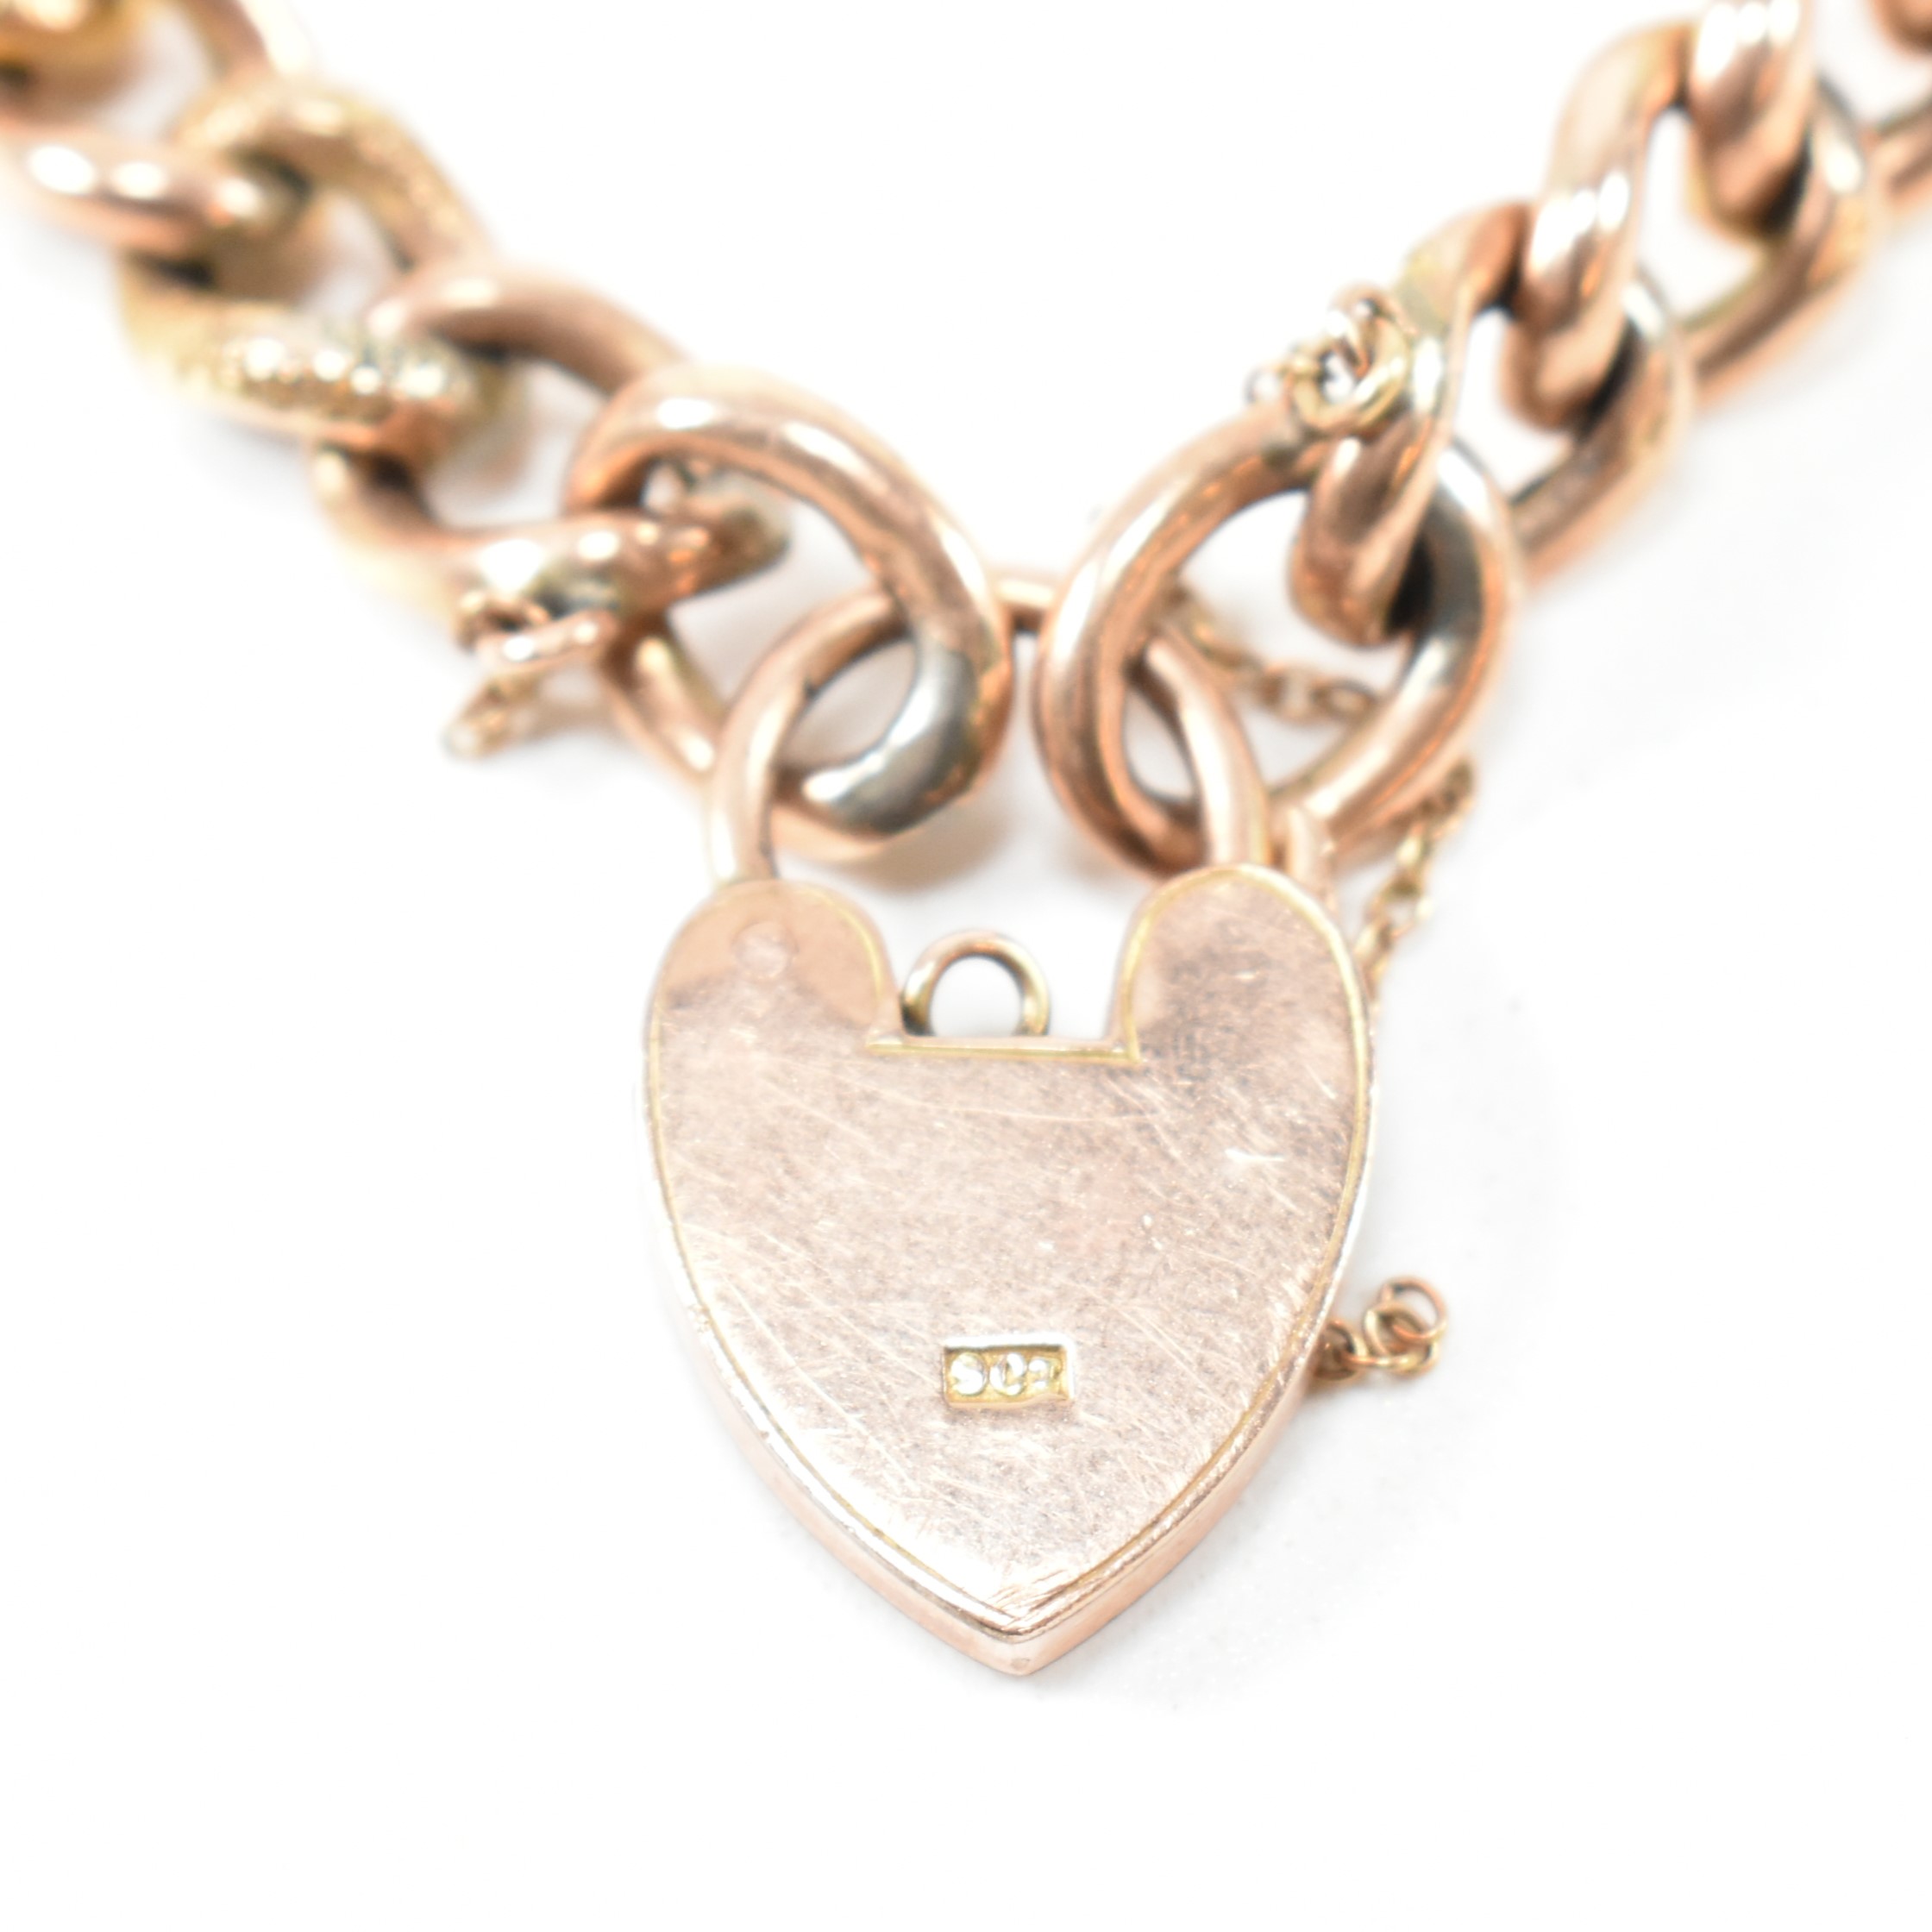 19TH CENTURY ROSE METAL CURB LINK BRACELET WITH 9CT GOLD HEART PADLOCK CLASP - Image 3 of 4